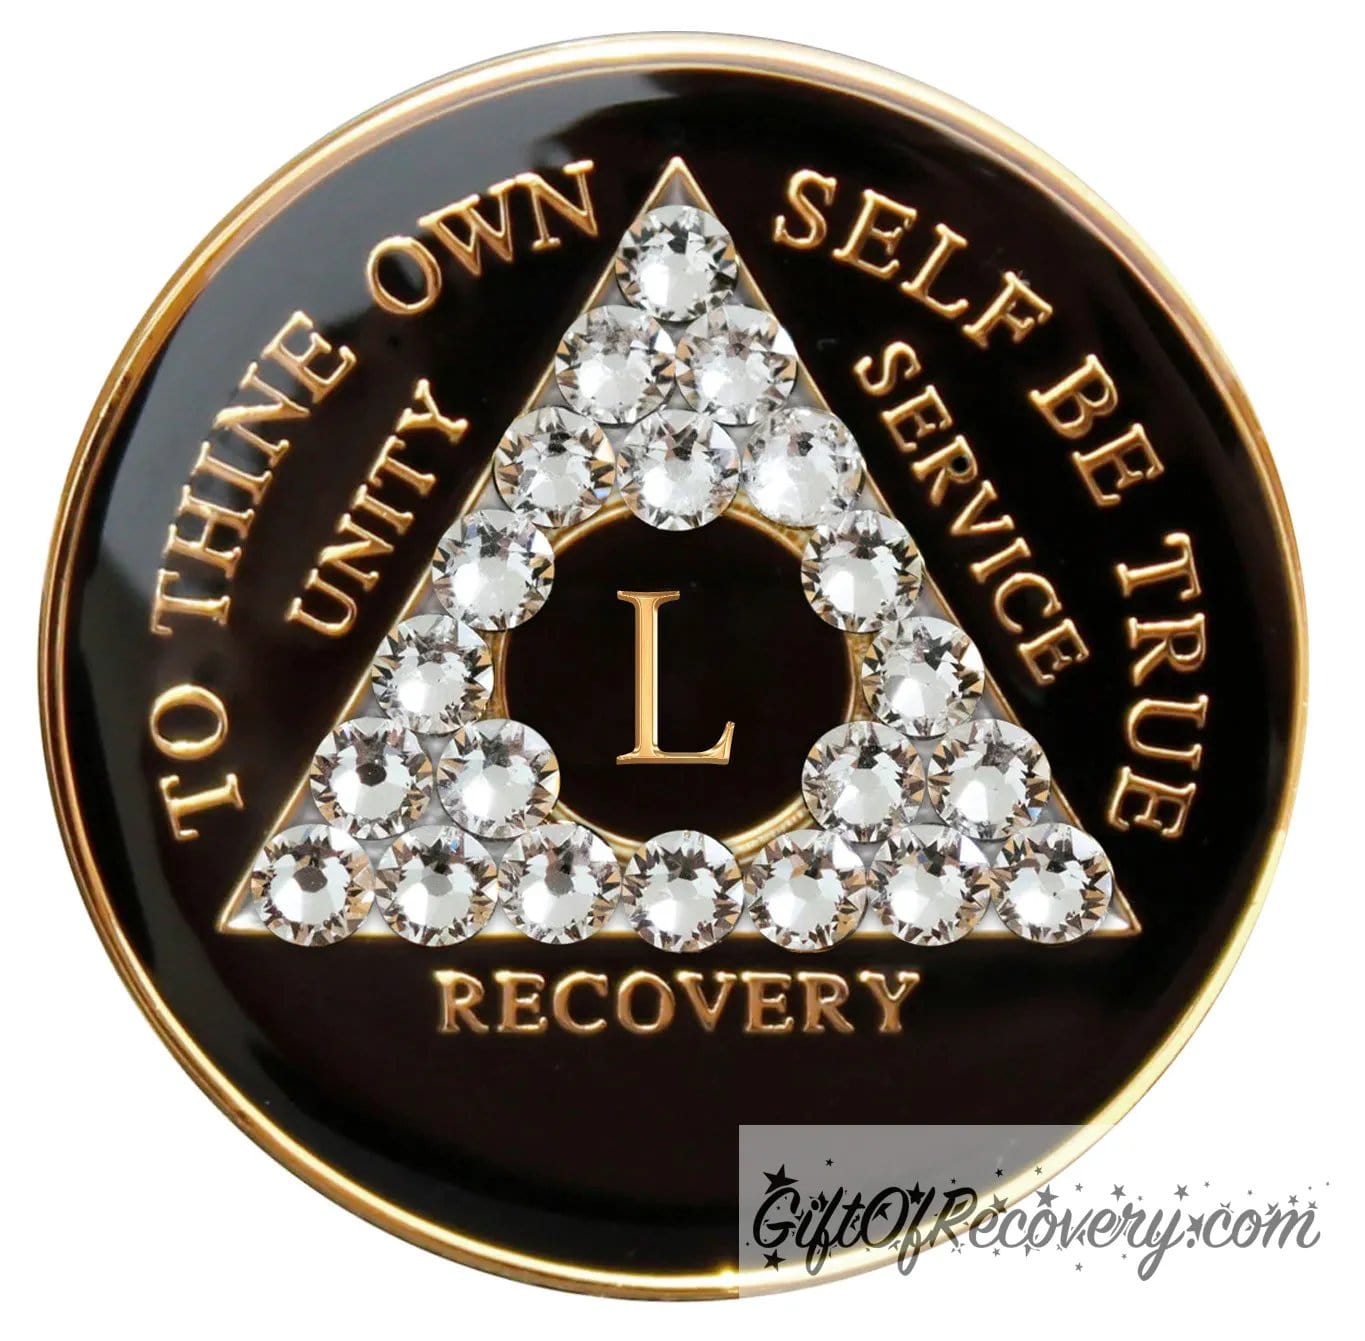 50 year AA medallion black onyx with 21 clear genuine crystals in the shape of the triangle, to thine own self be true, unity, service, recovery, and the roman numeral are embossed with 14k gold-plated brass, the recovery medallion is sealed with resin for a glossy finish that will last and is scratch proof.